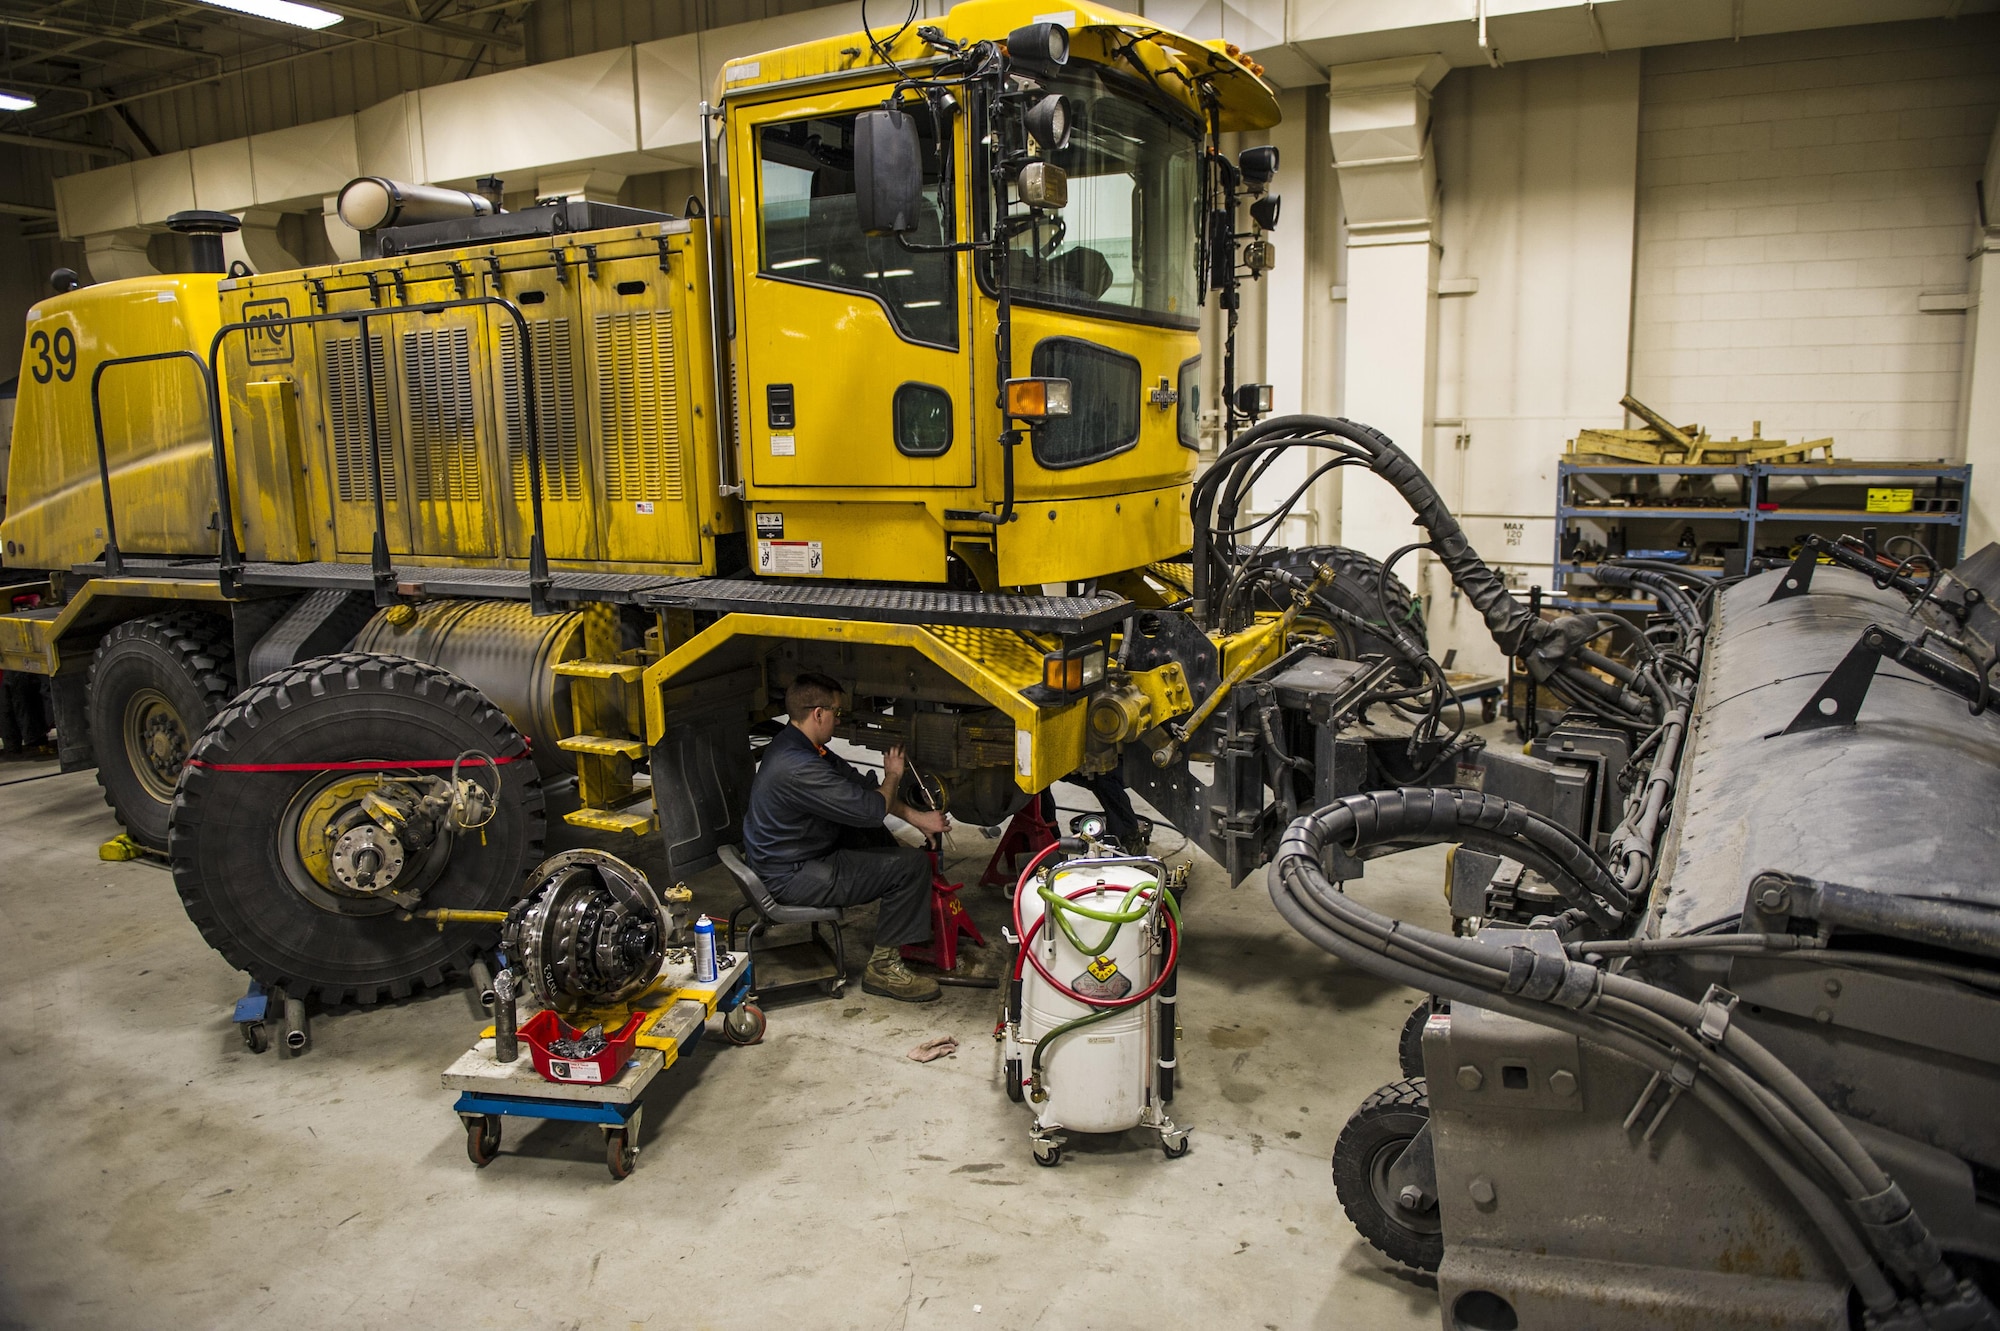 Senior Airman Anthony Tavares cleans the front axle housing of a flightline snow broom Jan. 8, 2014, at Eielson Air Force Base, Alaska. Winter months can cover the base with snow and ice, requiring snow removal operations throughout the week. Airmen with the 354th Logistics Readiness Squadron perform maintenance on vehicles to ensure the 354th Fighter Wing mission is unhindered. Tavares is a 354th LRS vehicle maintenance journeyman. (U.S. Air Force photo/Senior Airman Joshua Turner)